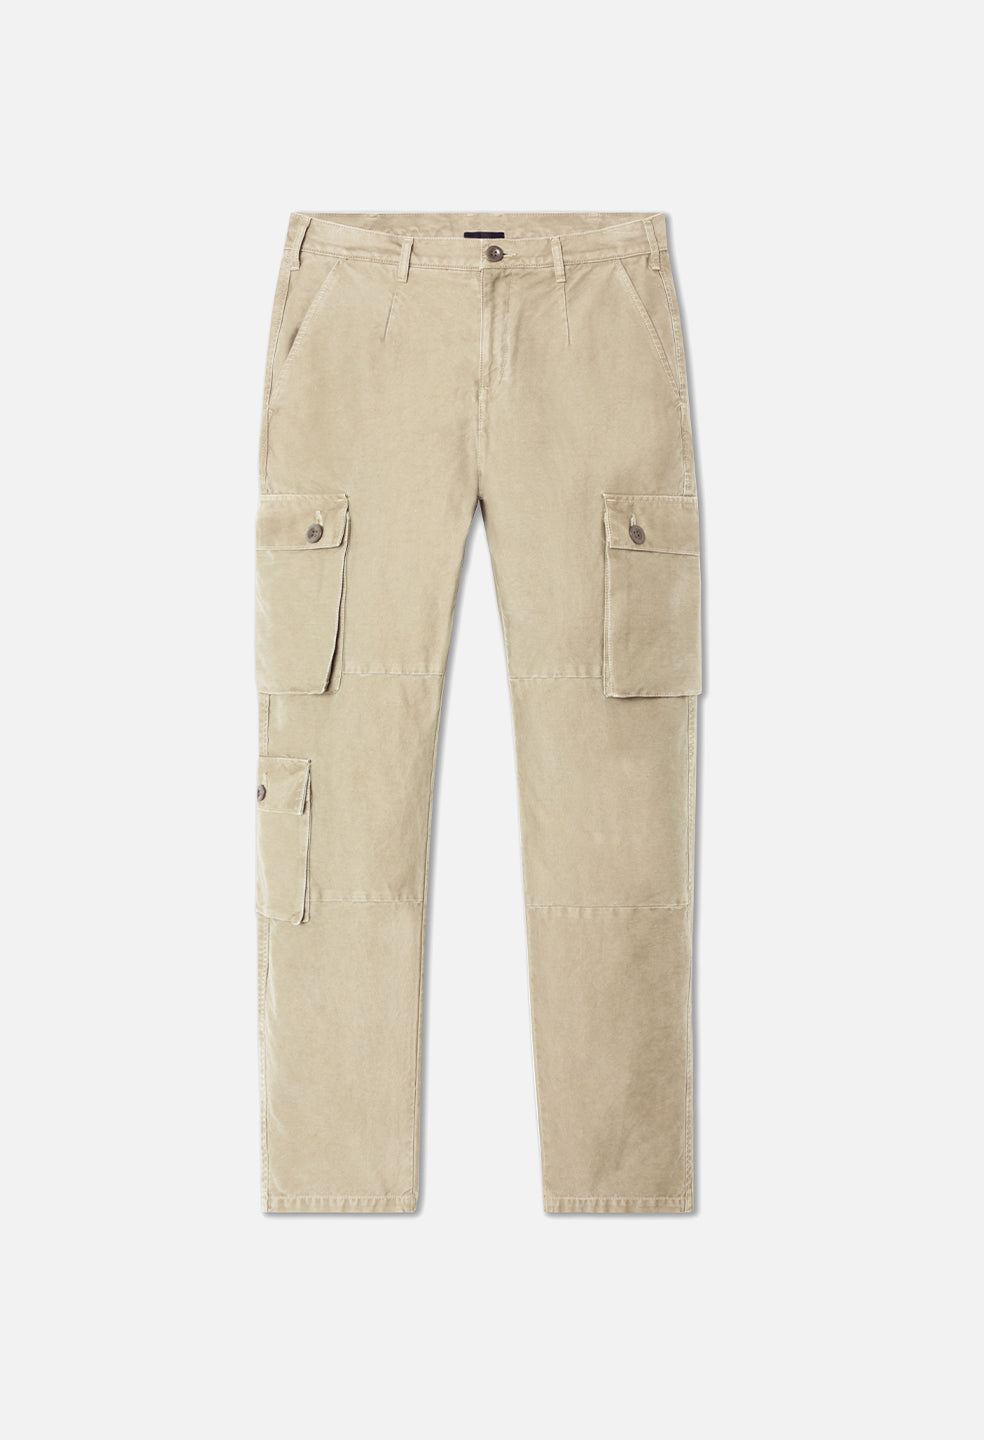 L'AGENCE - Patton Cargo Skinny Pant in Rye